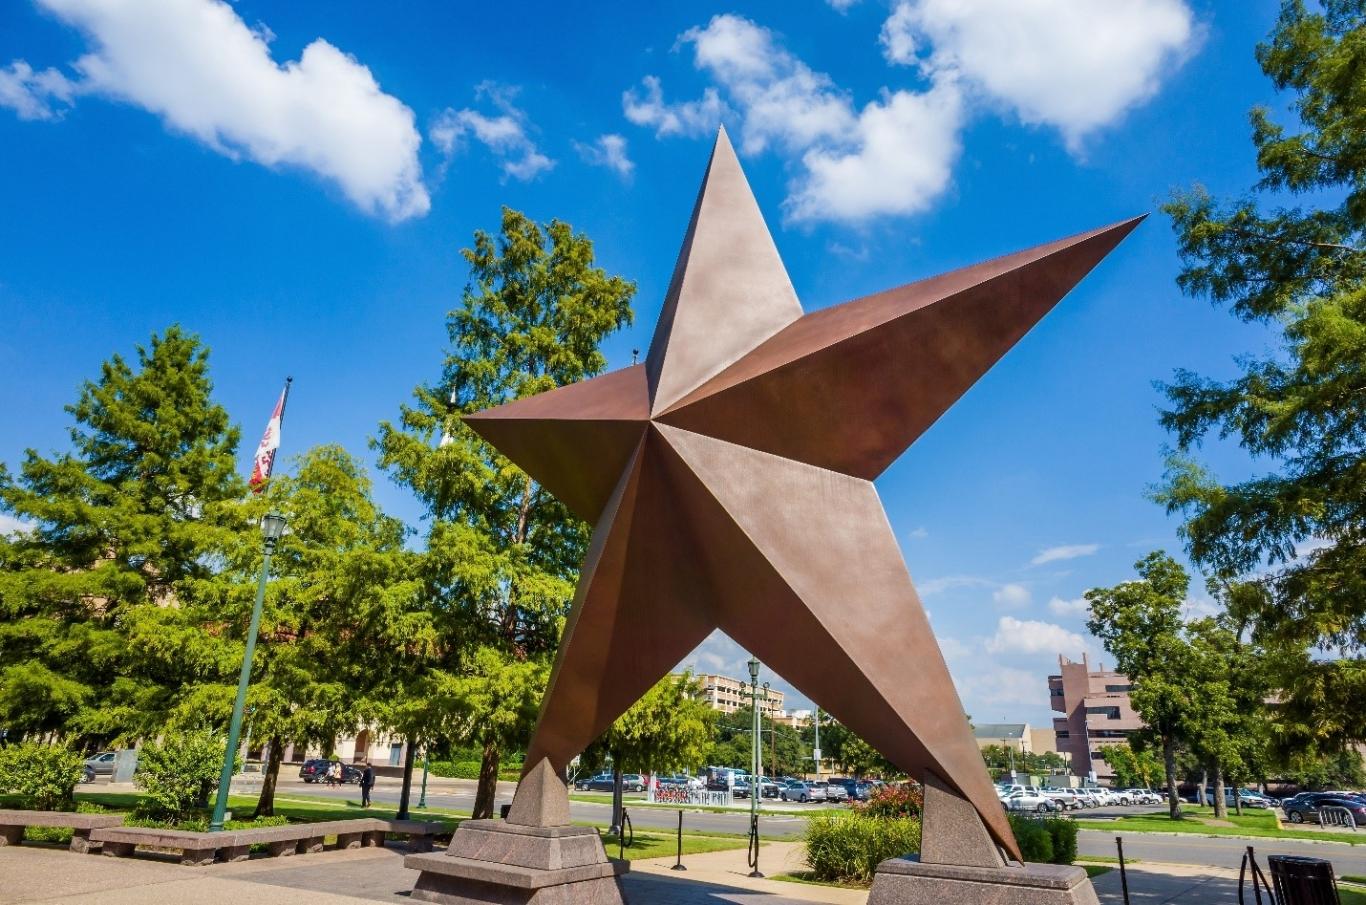 A large star statue in East Austin, Texas.